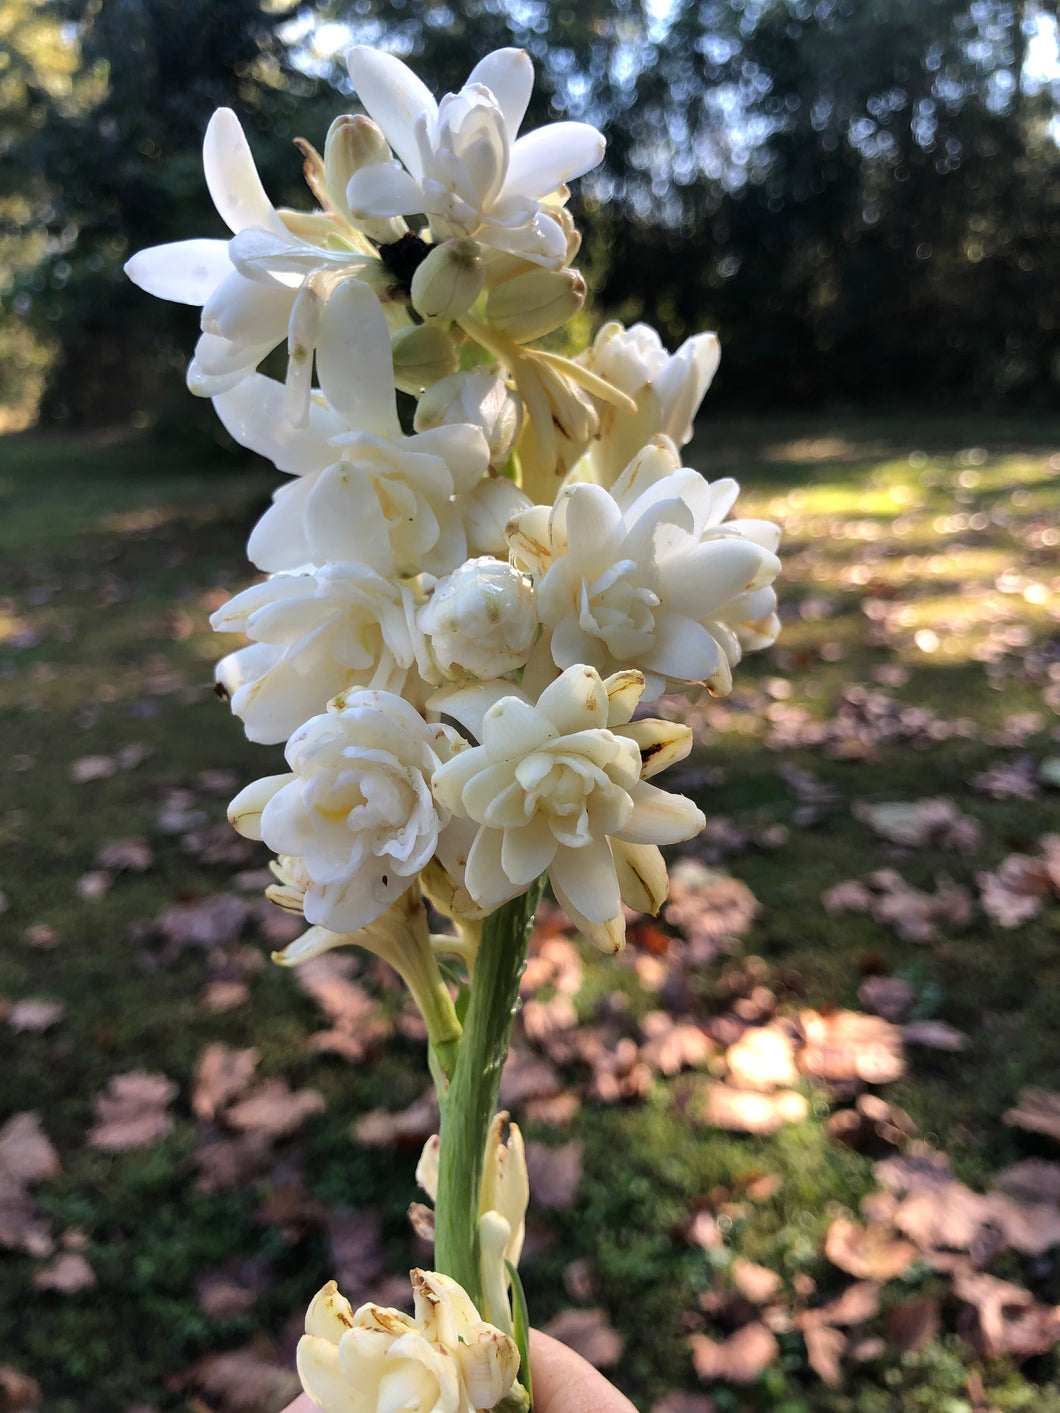 Plants Polianthes Tuberose fragrant Double White, The Pearl Starter Plant Southern Flower Garden  Southern Flower Garden